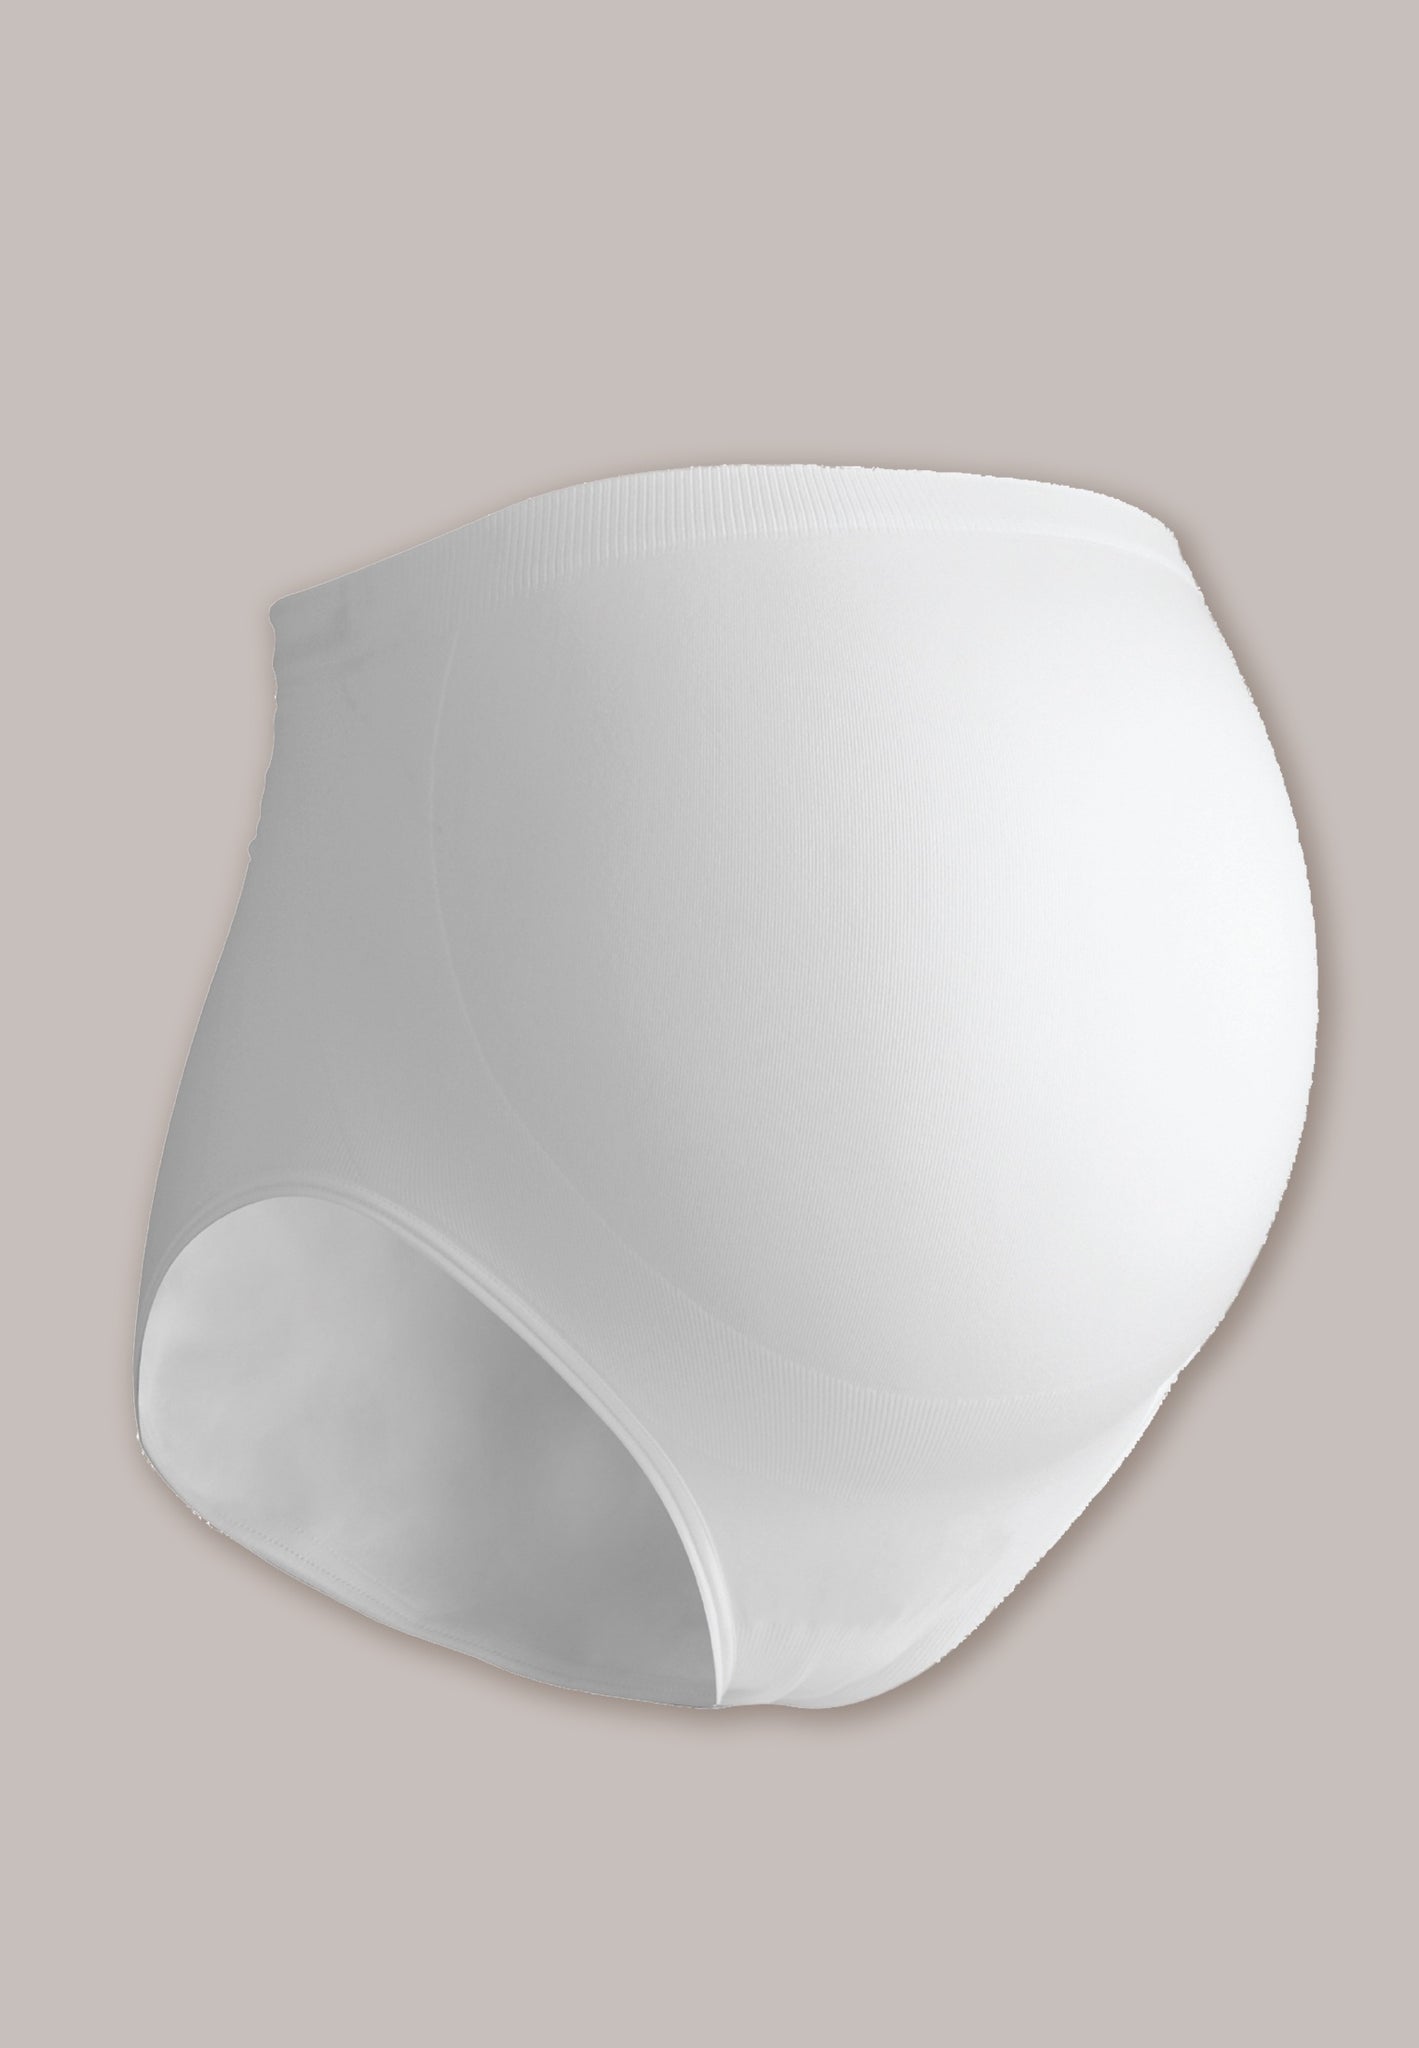 Maternity- and hospital panty black, Carriwell